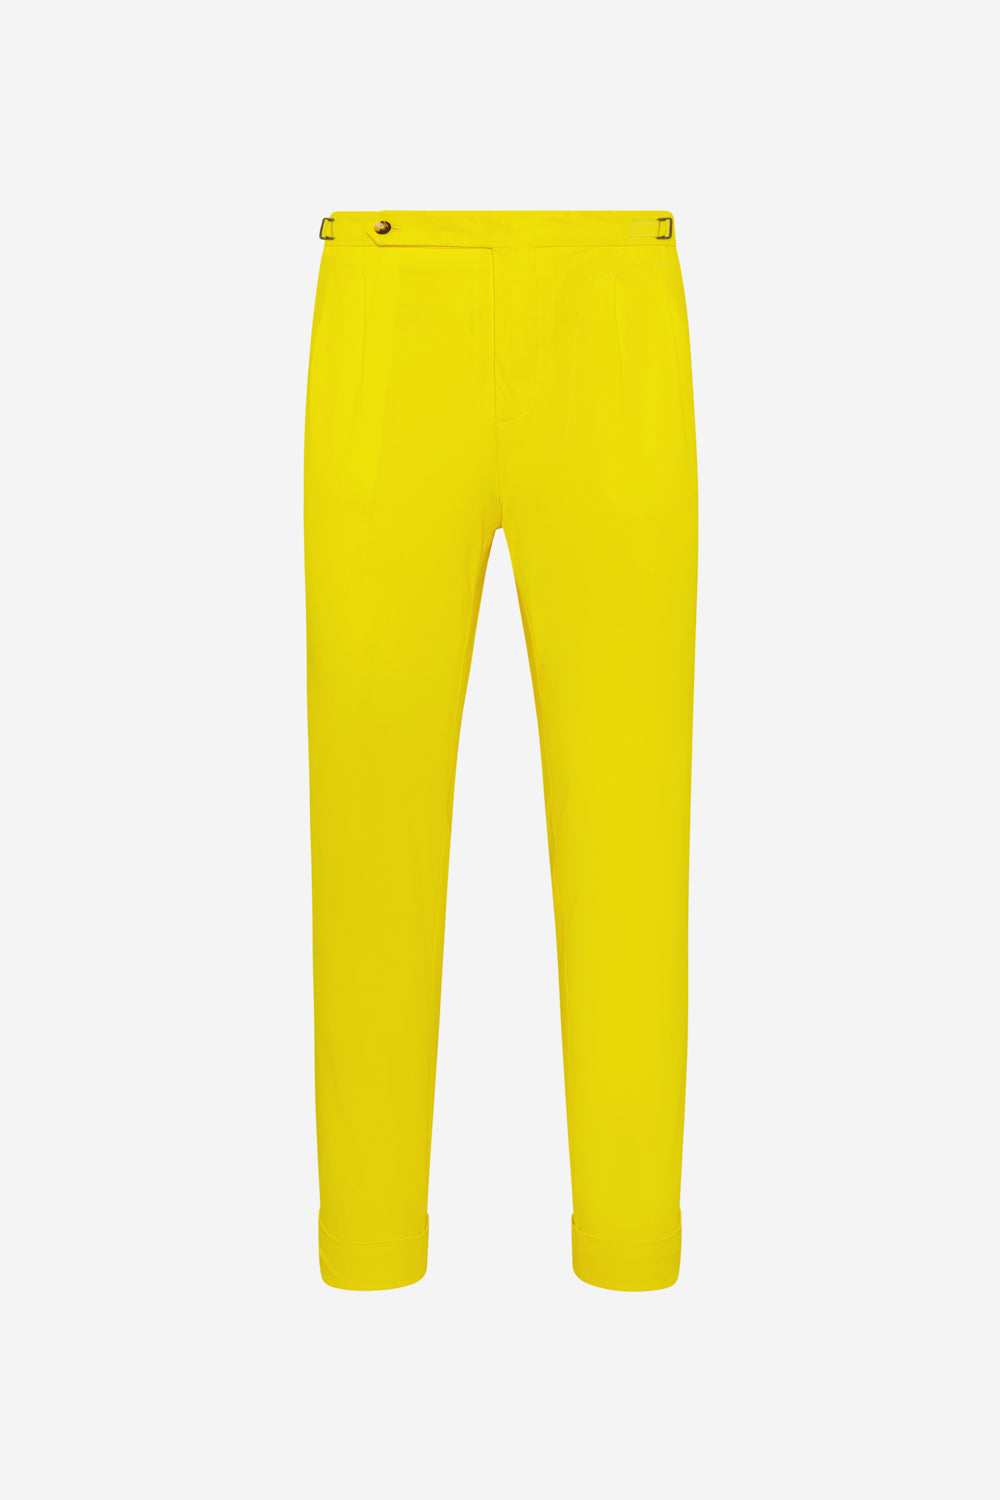 YELLOW LOSSI TROUSERS